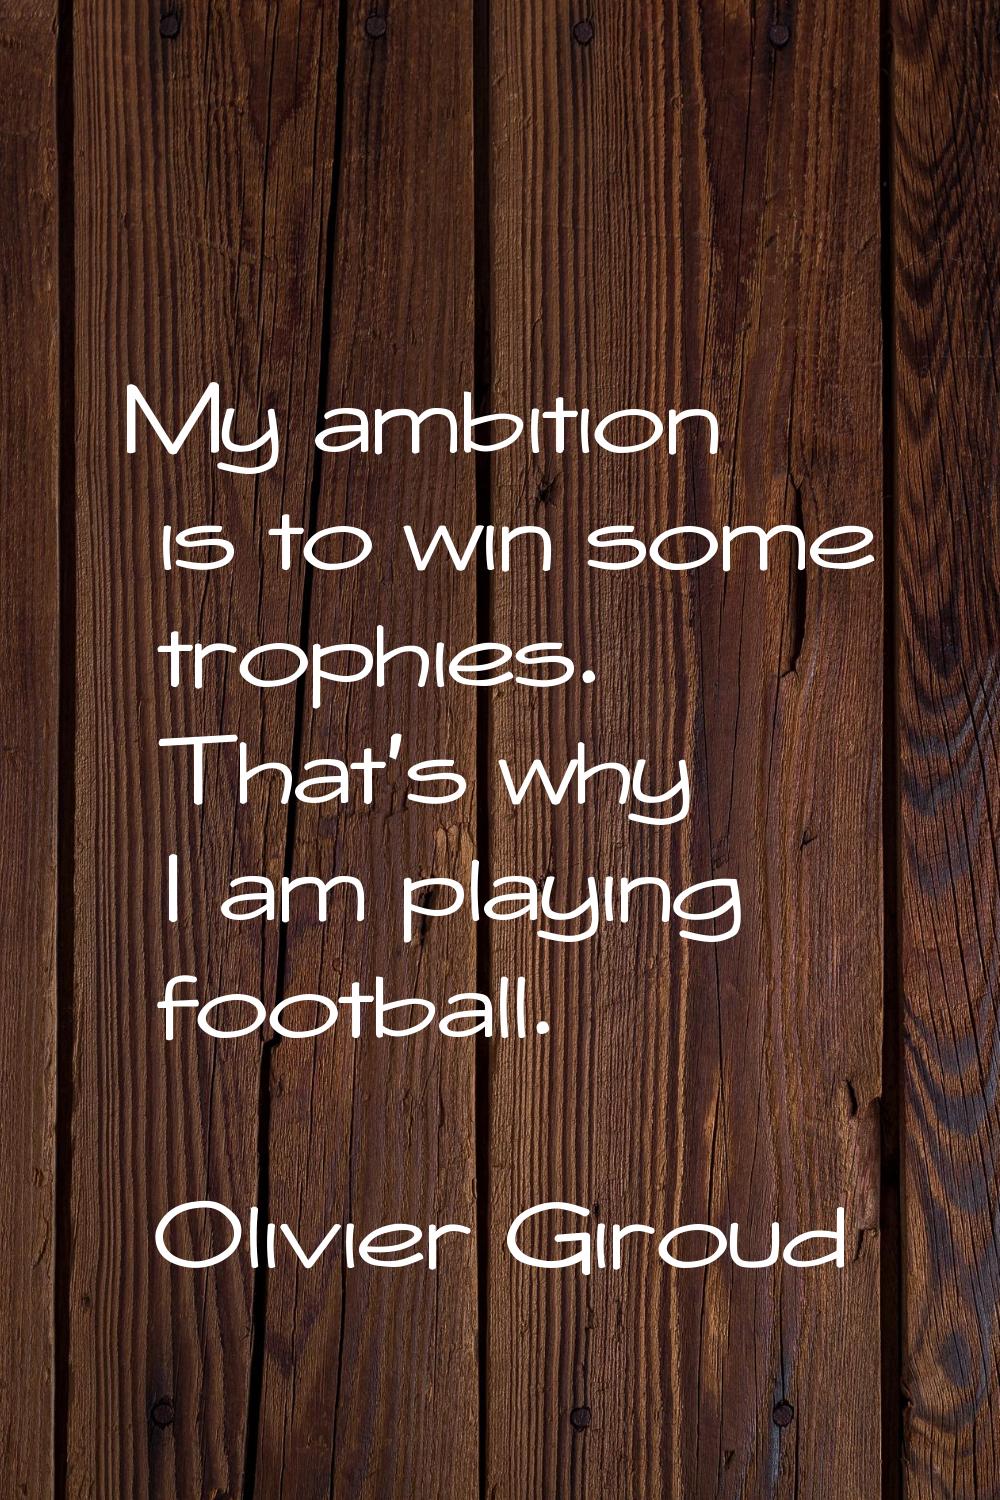 My ambition is to win some trophies. That's why I am playing football.